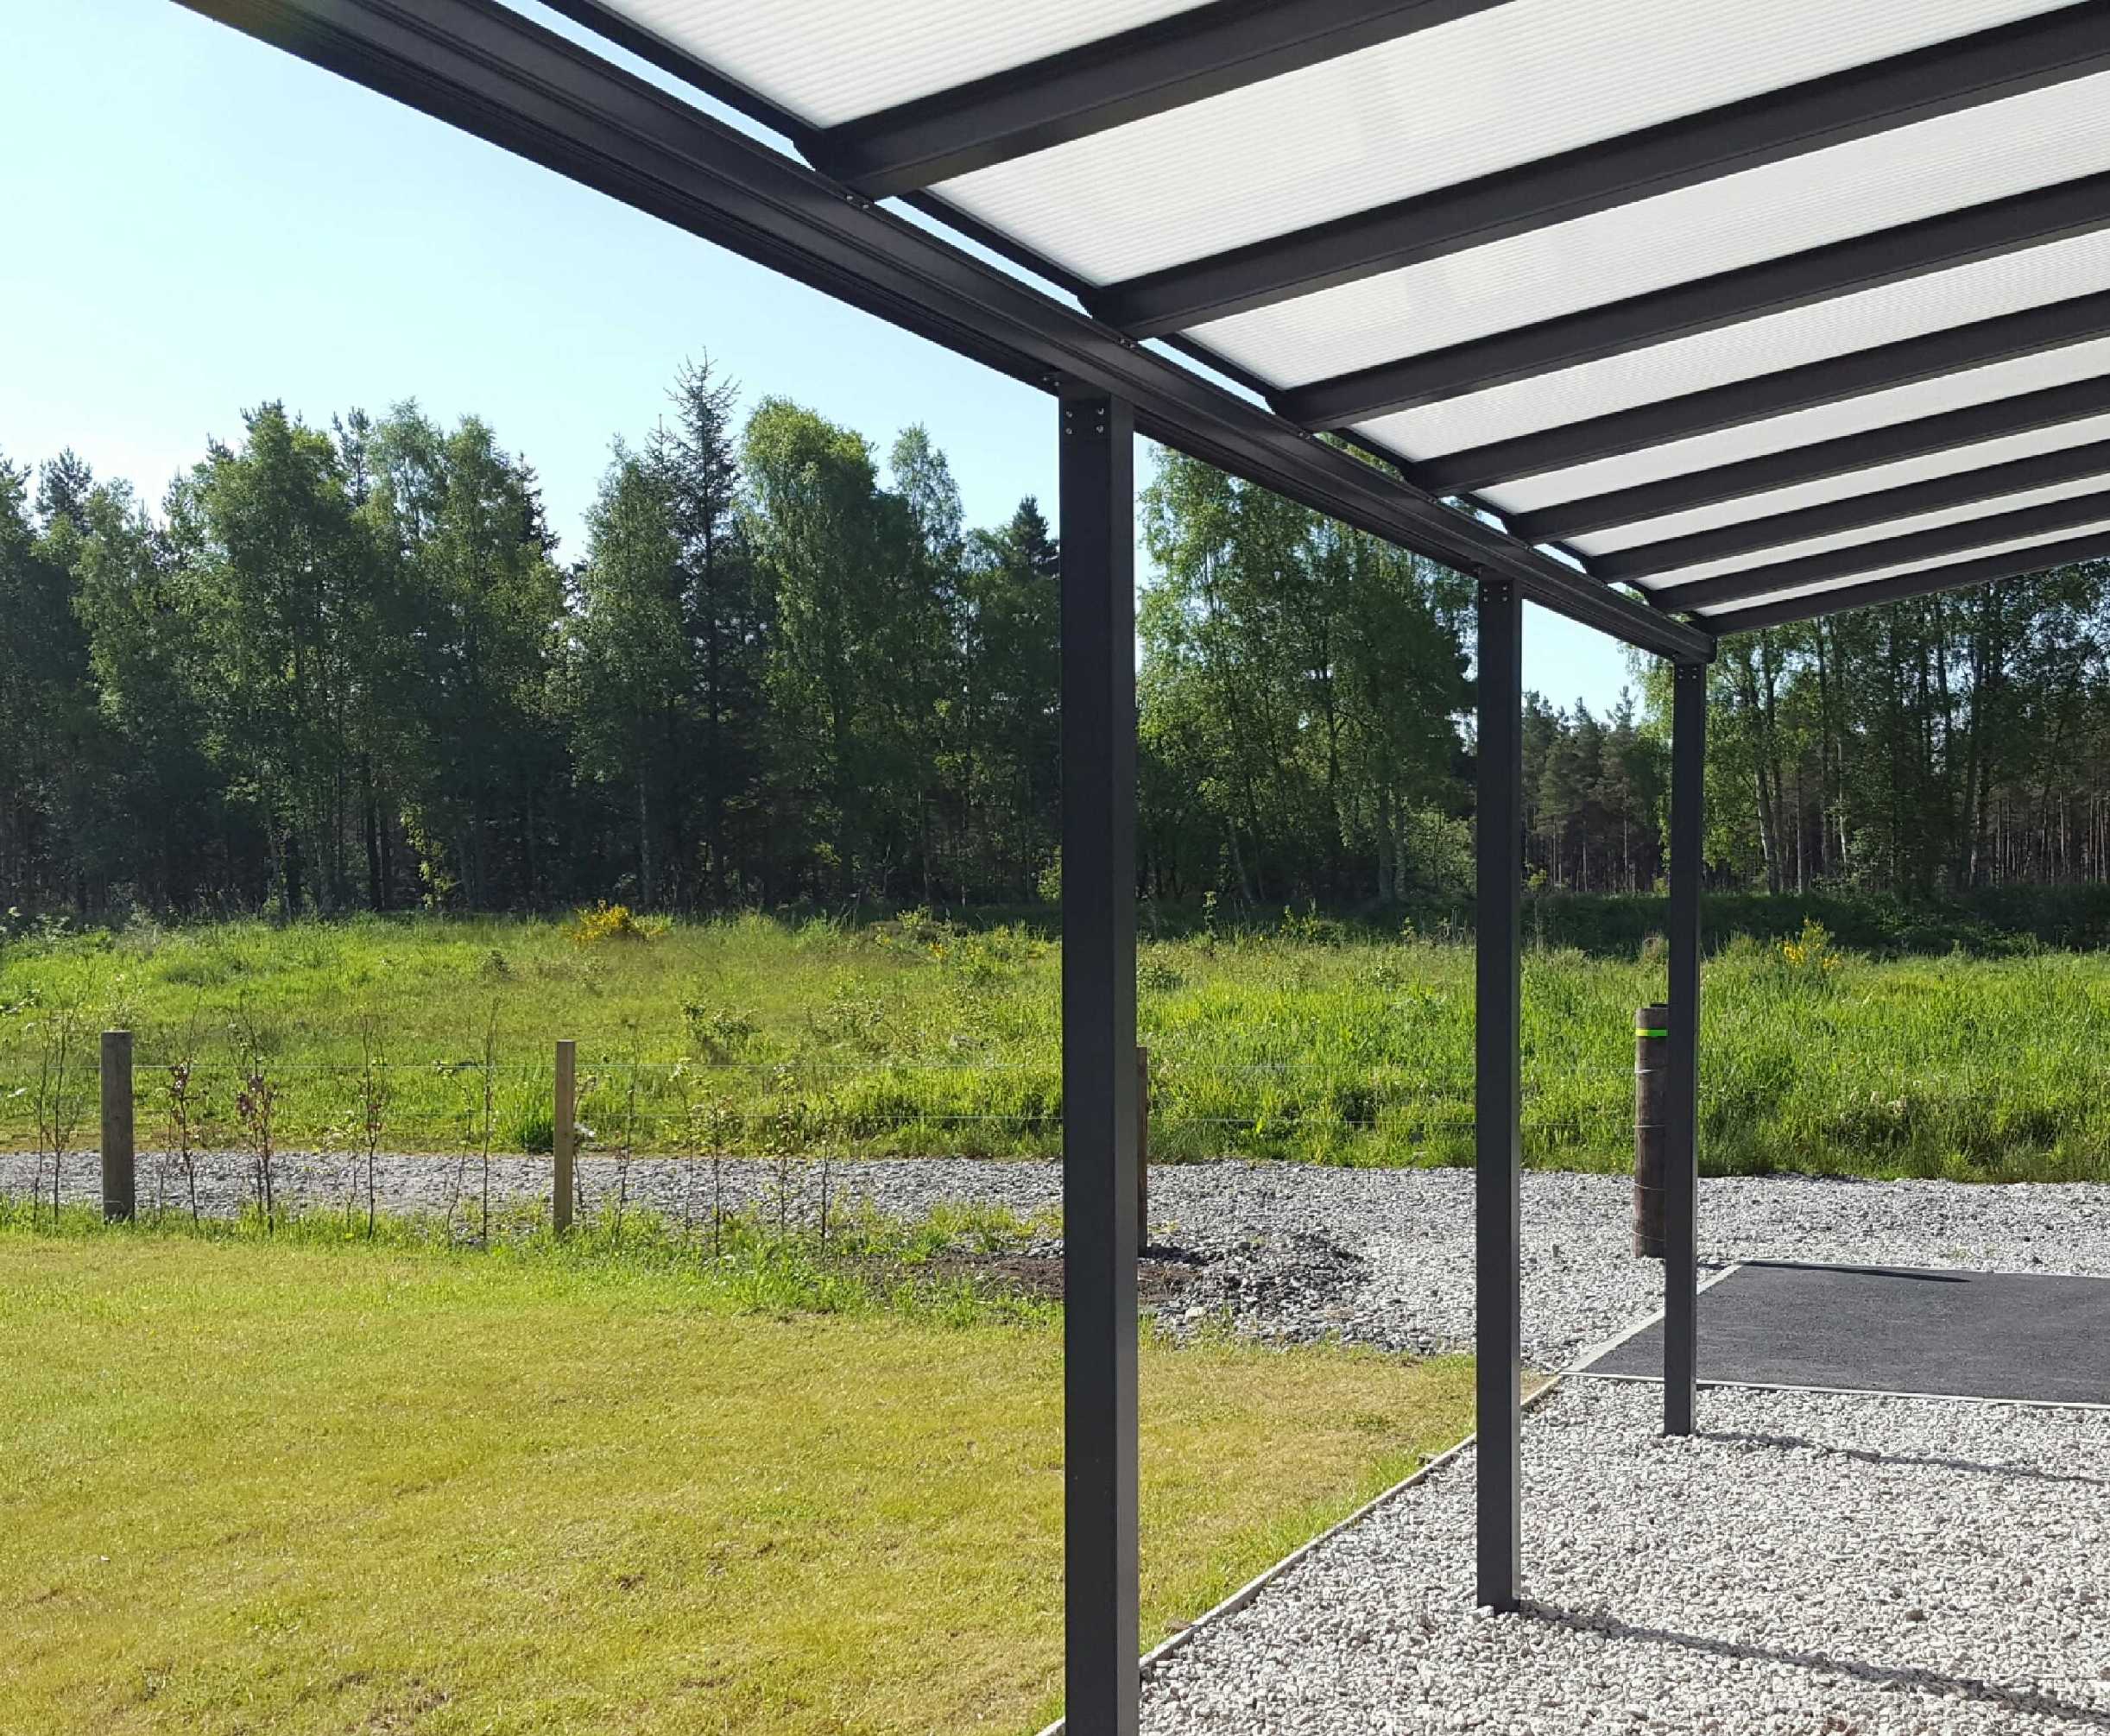 Omega Smart Lean-To Canopy, Anthracite Grey, UNGLAZED for 6mm Glazing - 5.6m (W) x 2.0m (P), (3) Supporting Posts